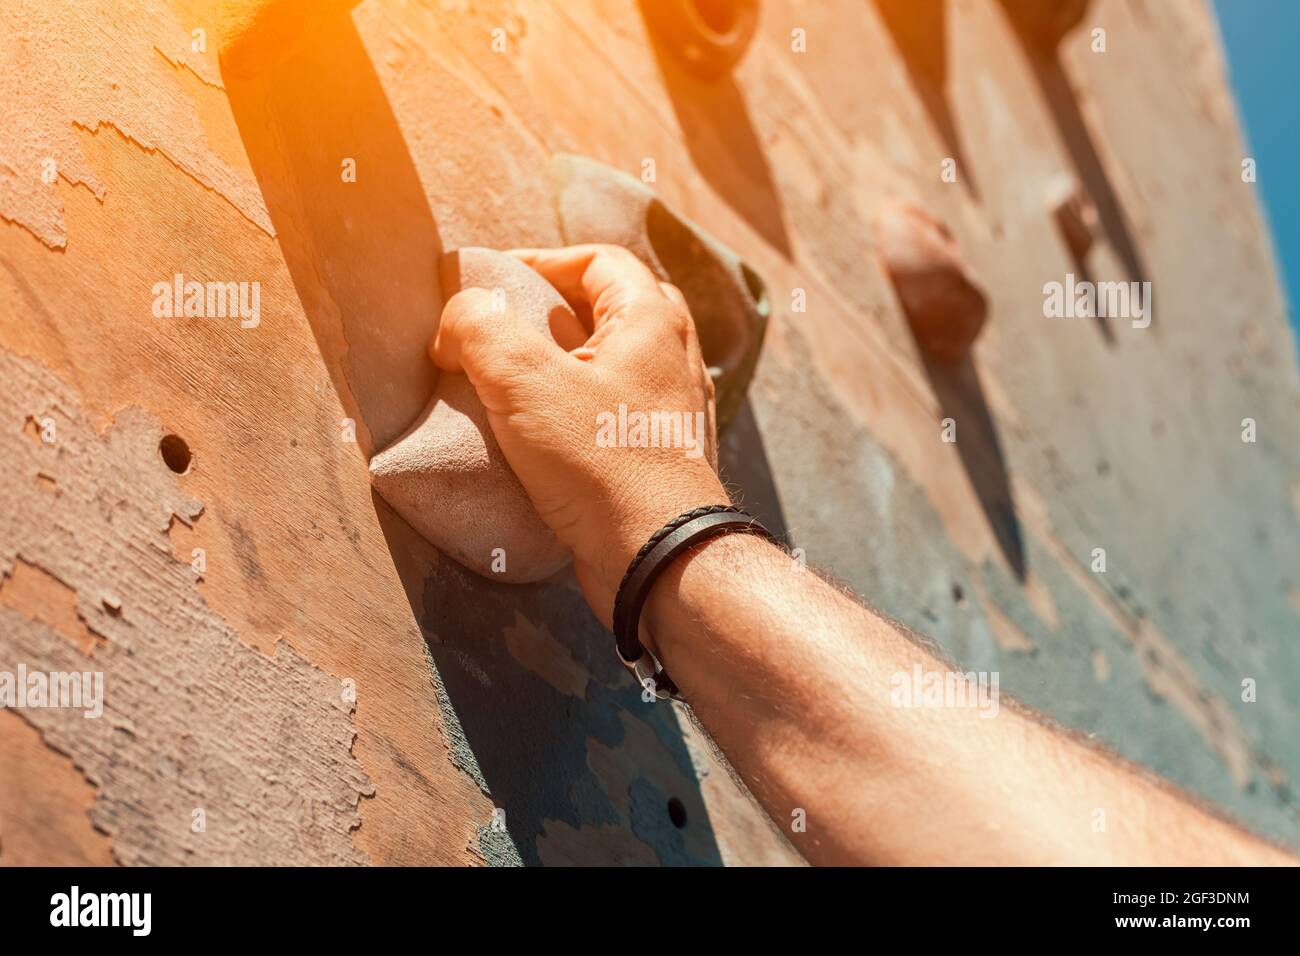 Close-up photo of male hand gripping climbing holds on worn wall outside. Man doing climbing exercise on artificial rock climbing wall at park. Stock Photo